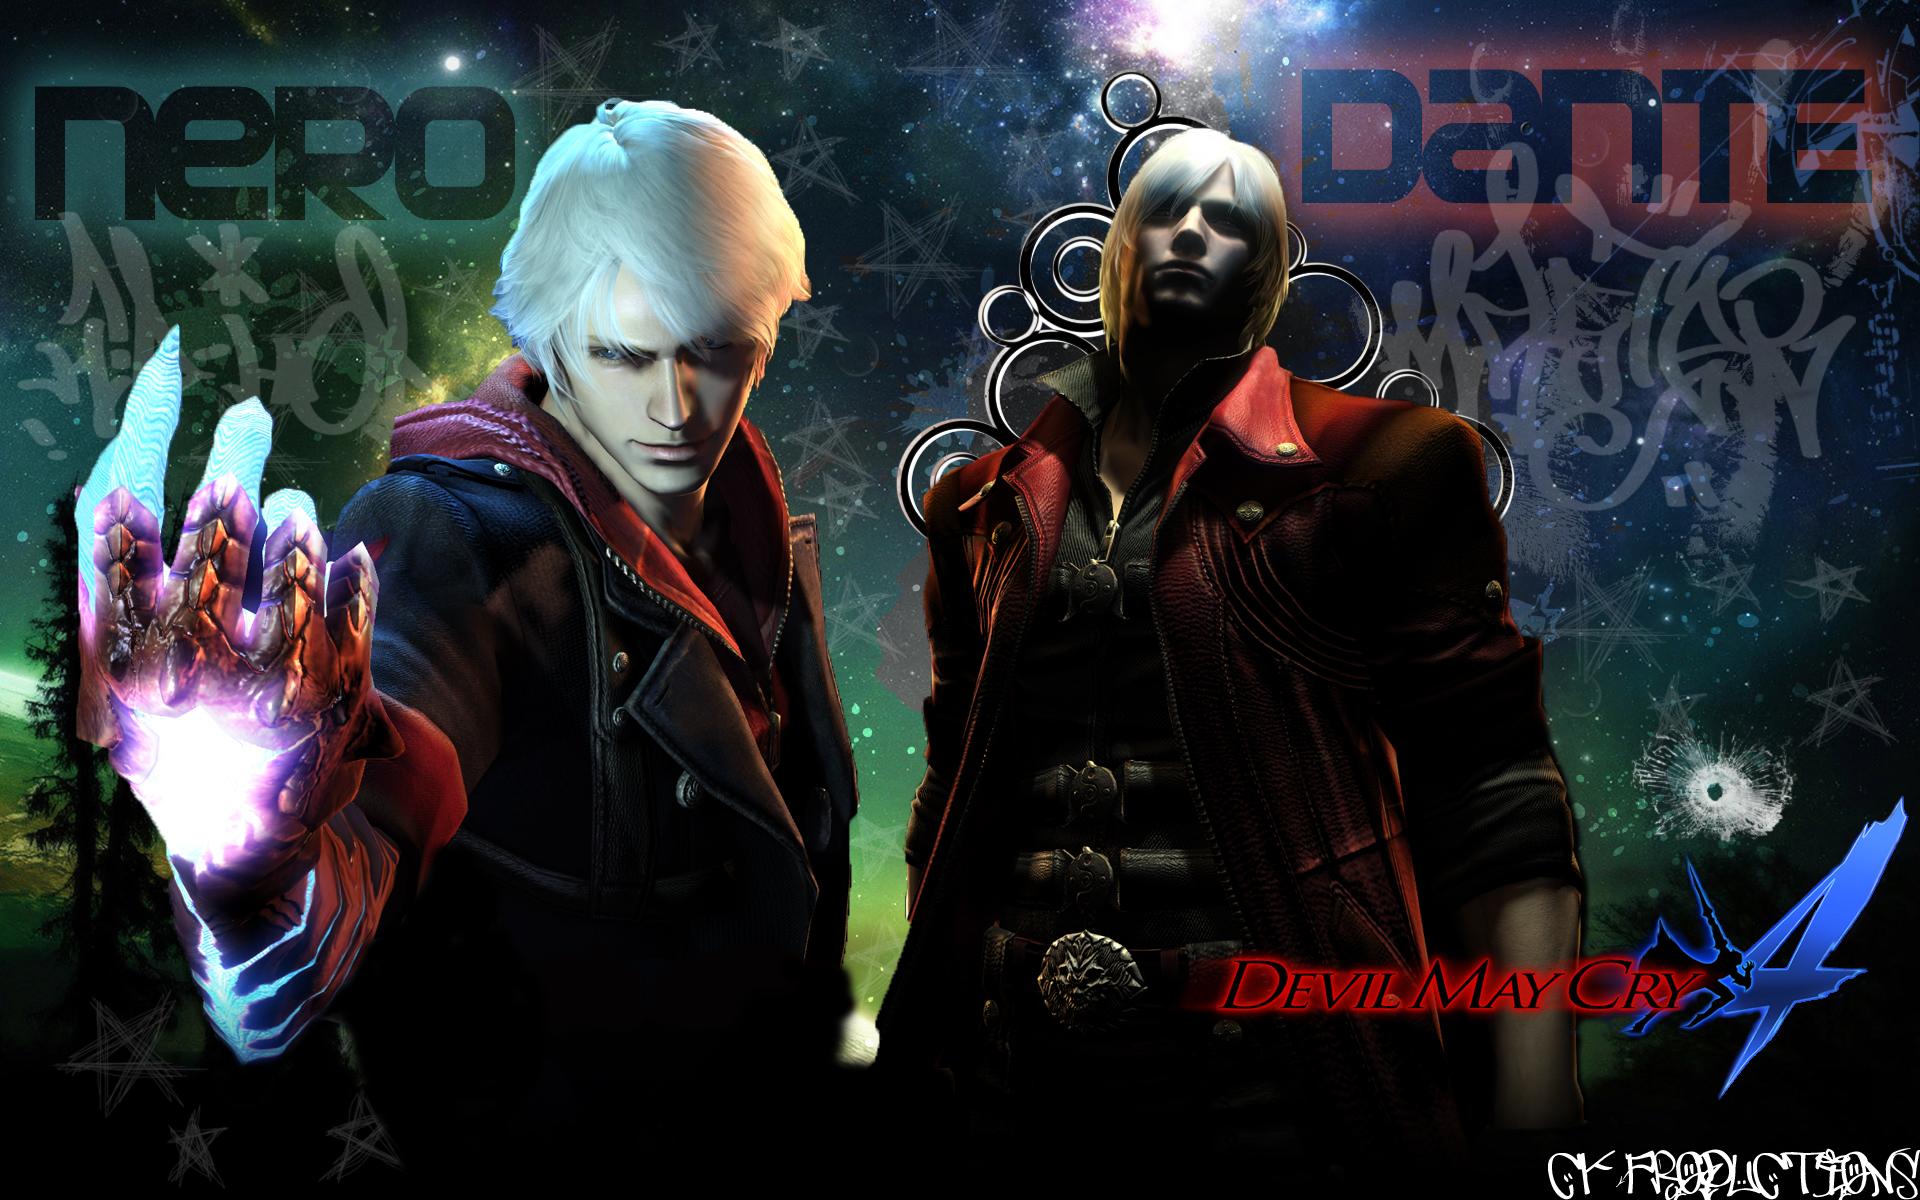 Devil+may+cry+3+special+edition